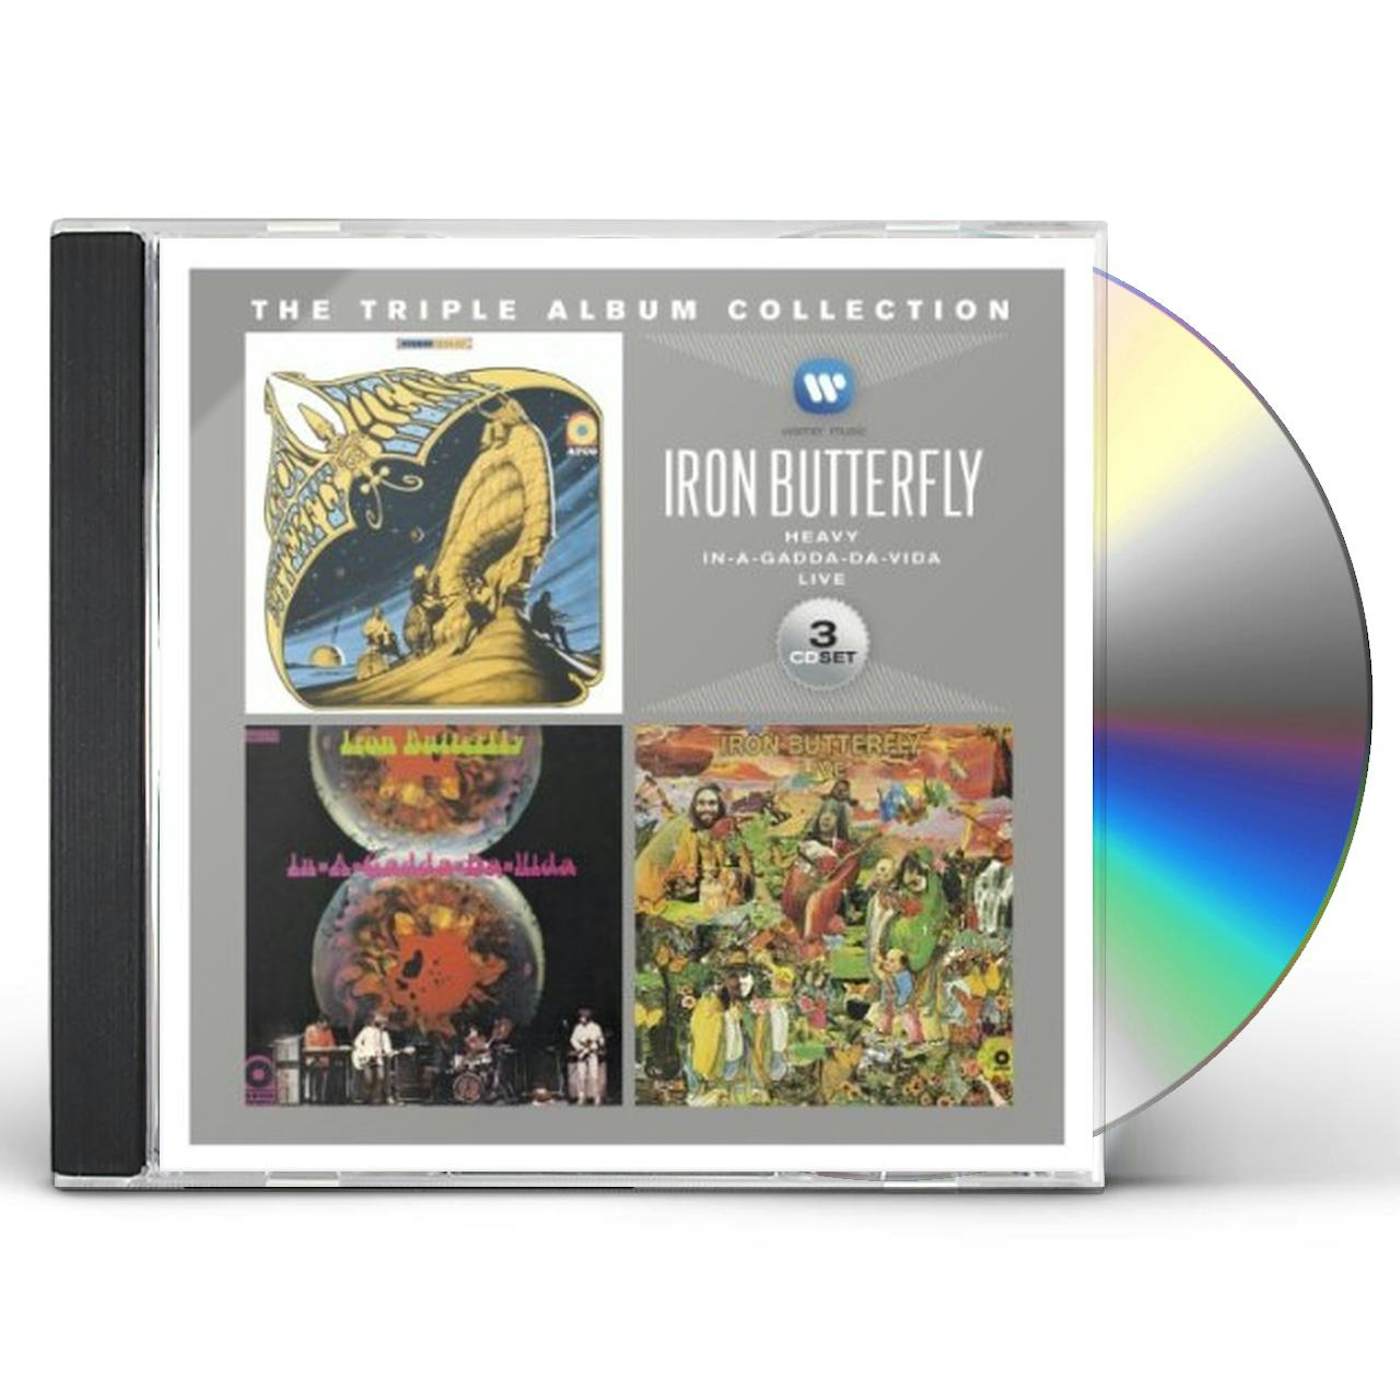 Iron Butterfly TRIPLE ALBUM COLLECTION CD